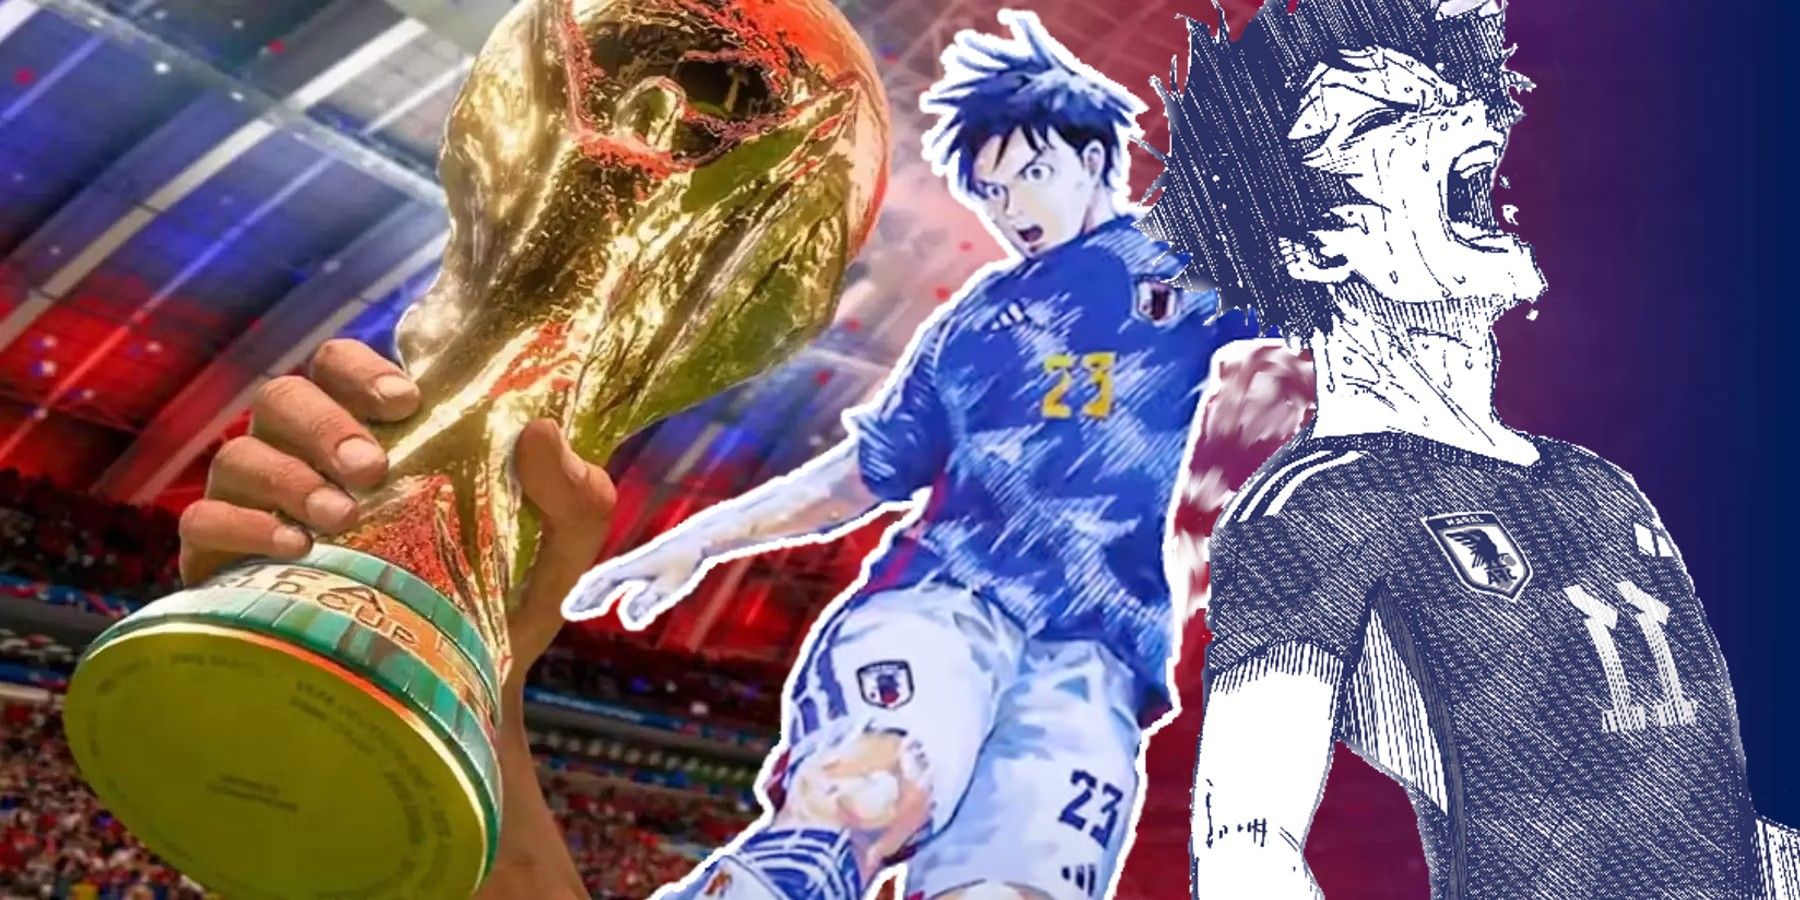 Blue Lock Is Real Manga Fans Are In A Tizzy After Japan Beats Germany At  FIFA World Cup 2022 Match Heres Why  Entertainment